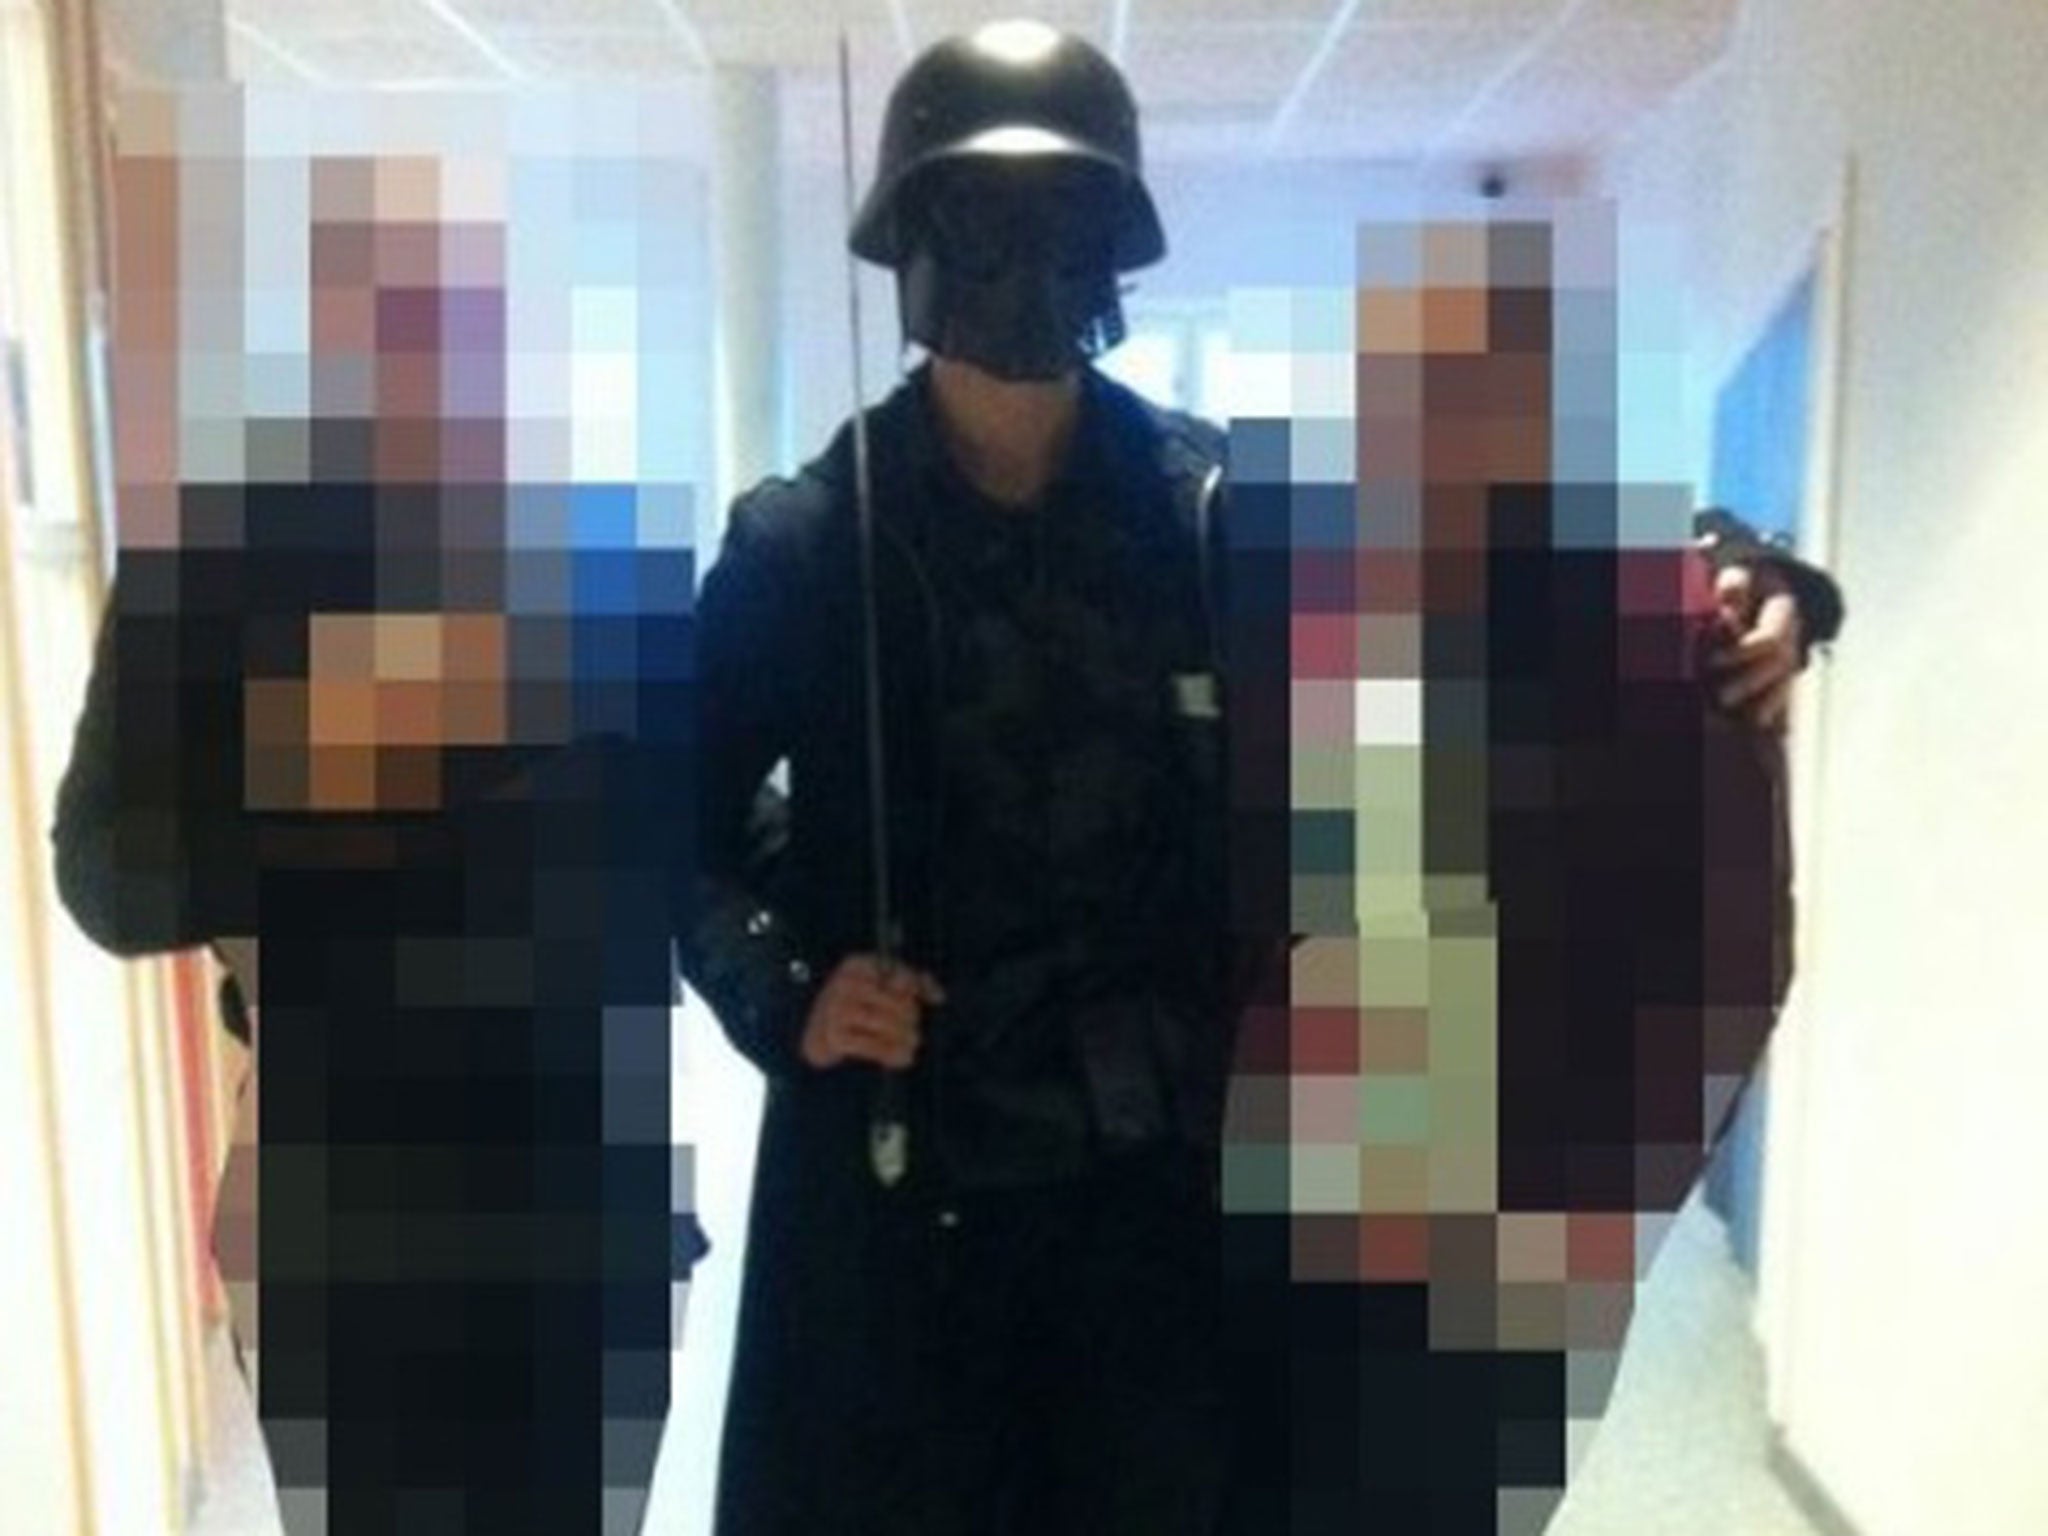 The attacker was dressed as Darth Vader and shouted 'I am your father' during his rampage